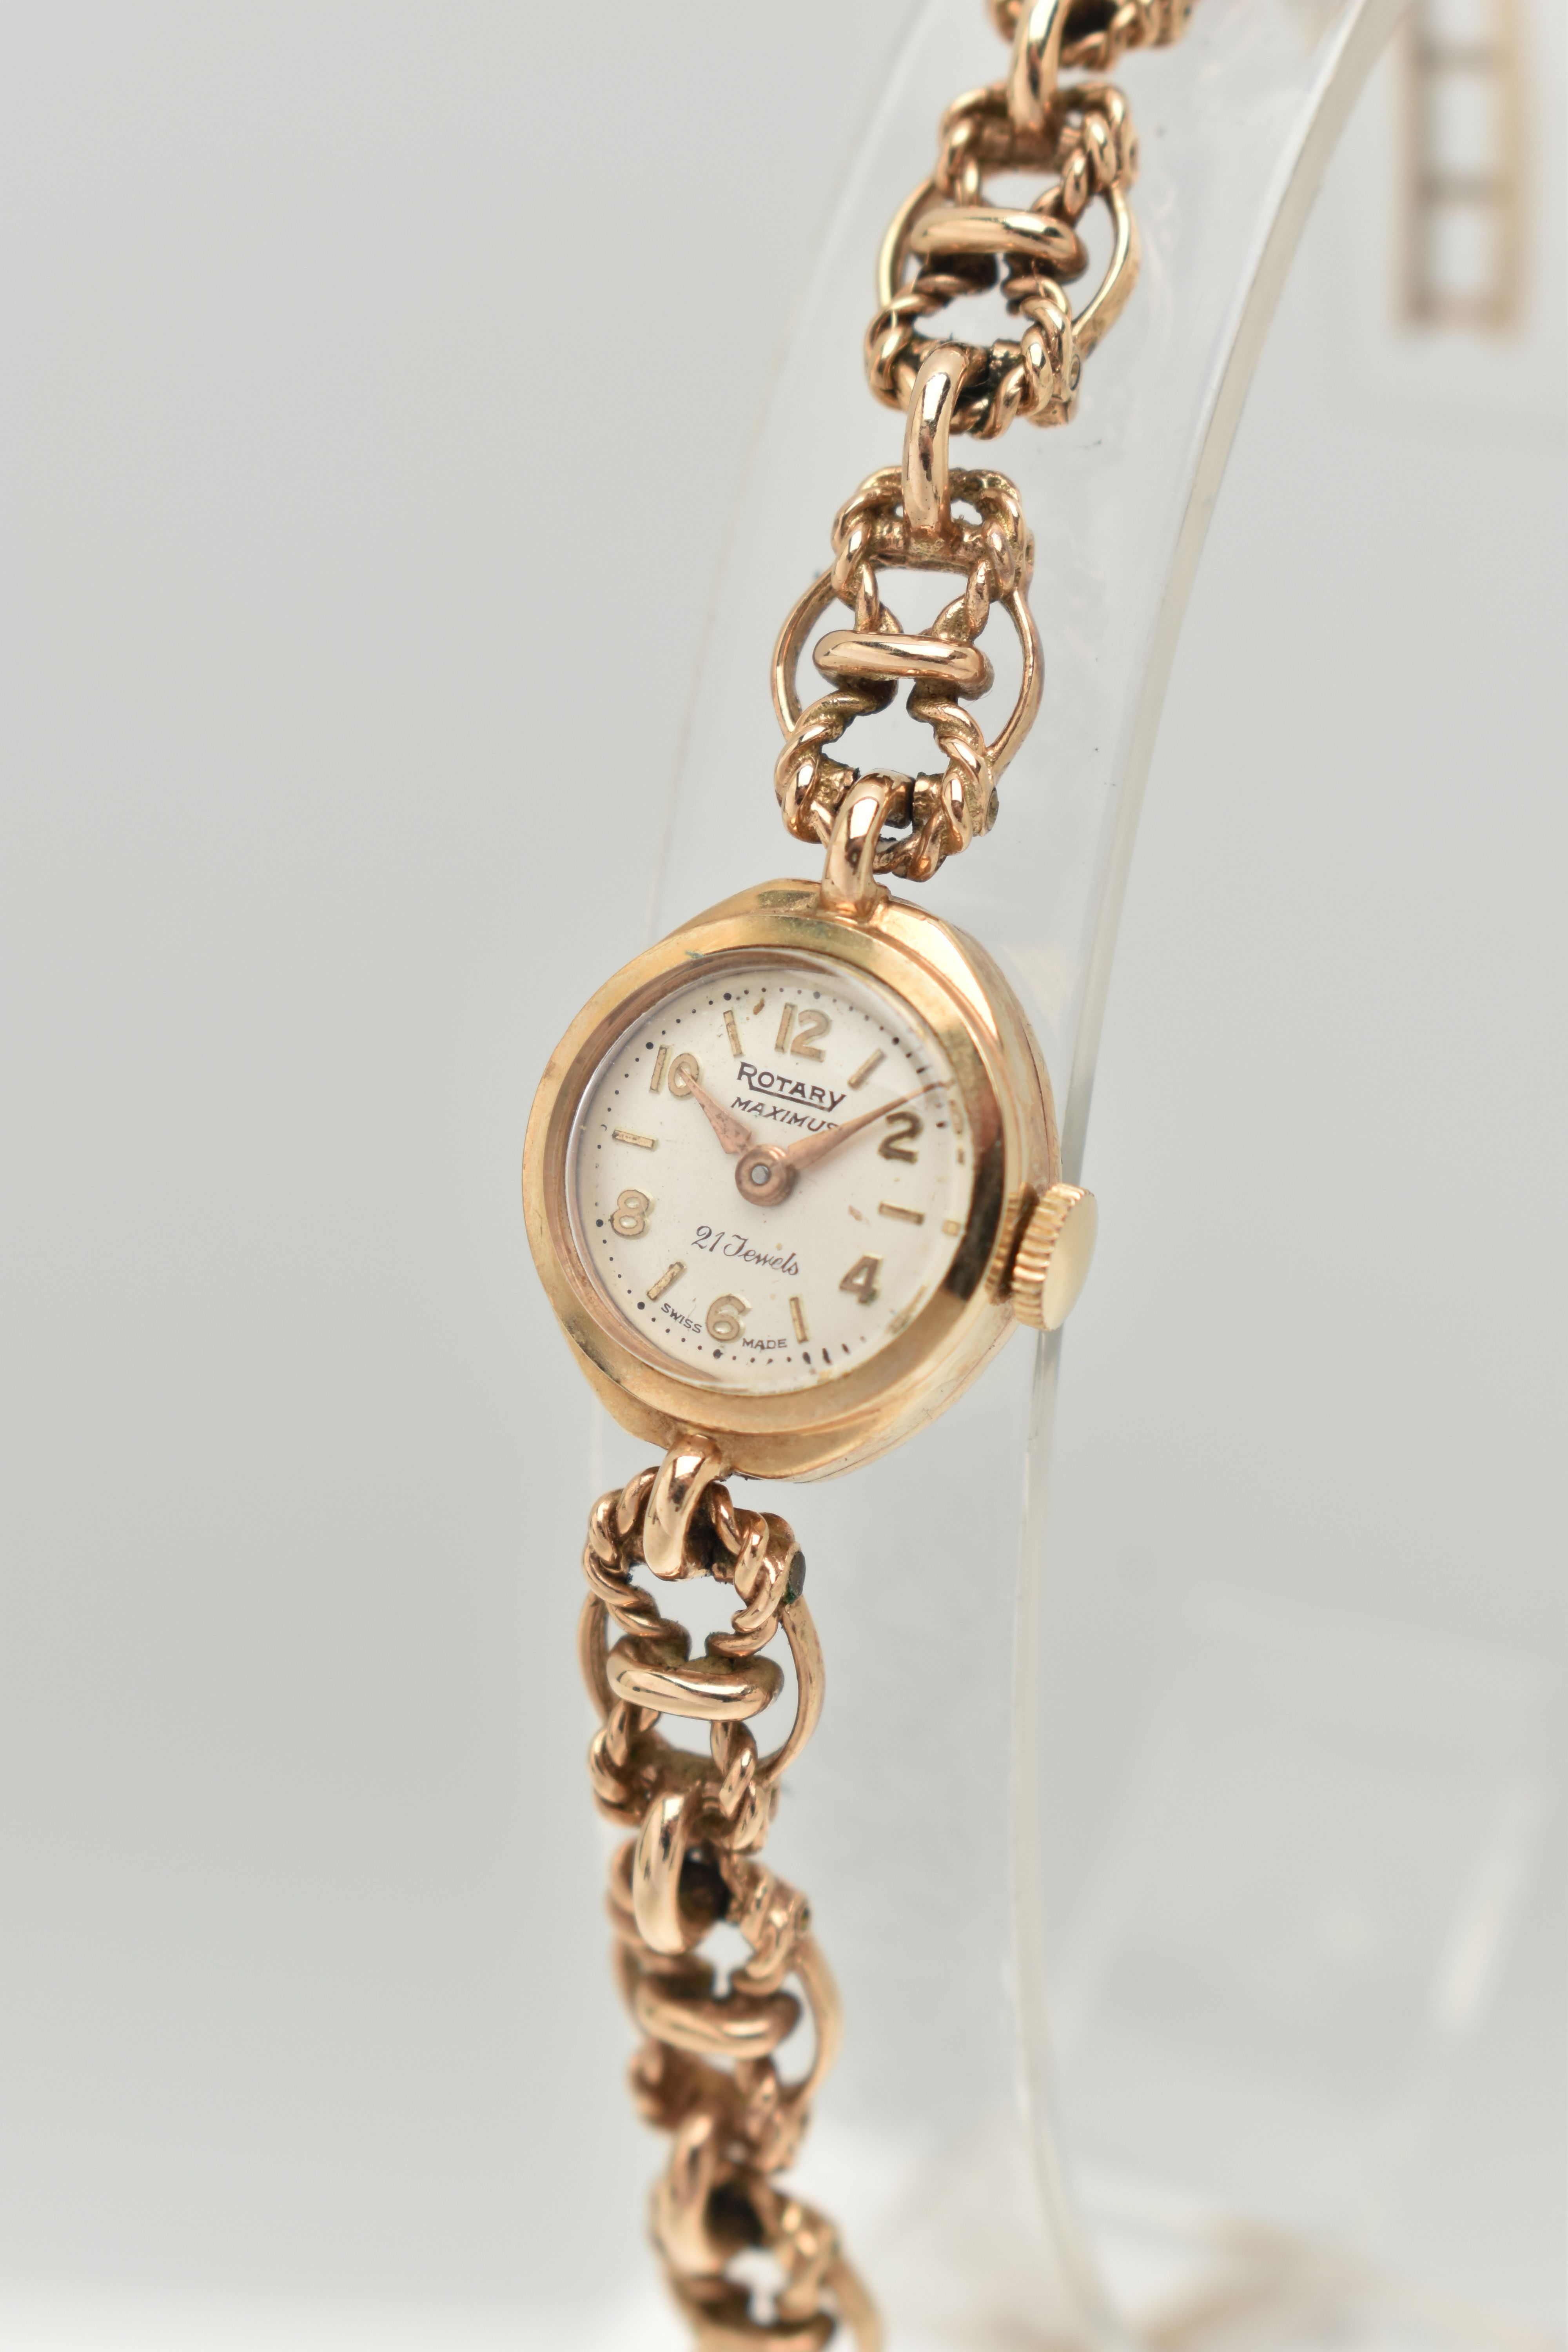 A 9CT GOLD LADIES WRISTWATCH, hand wound movement, round dial signed 'Rotary', Arabic and baton - Image 3 of 6